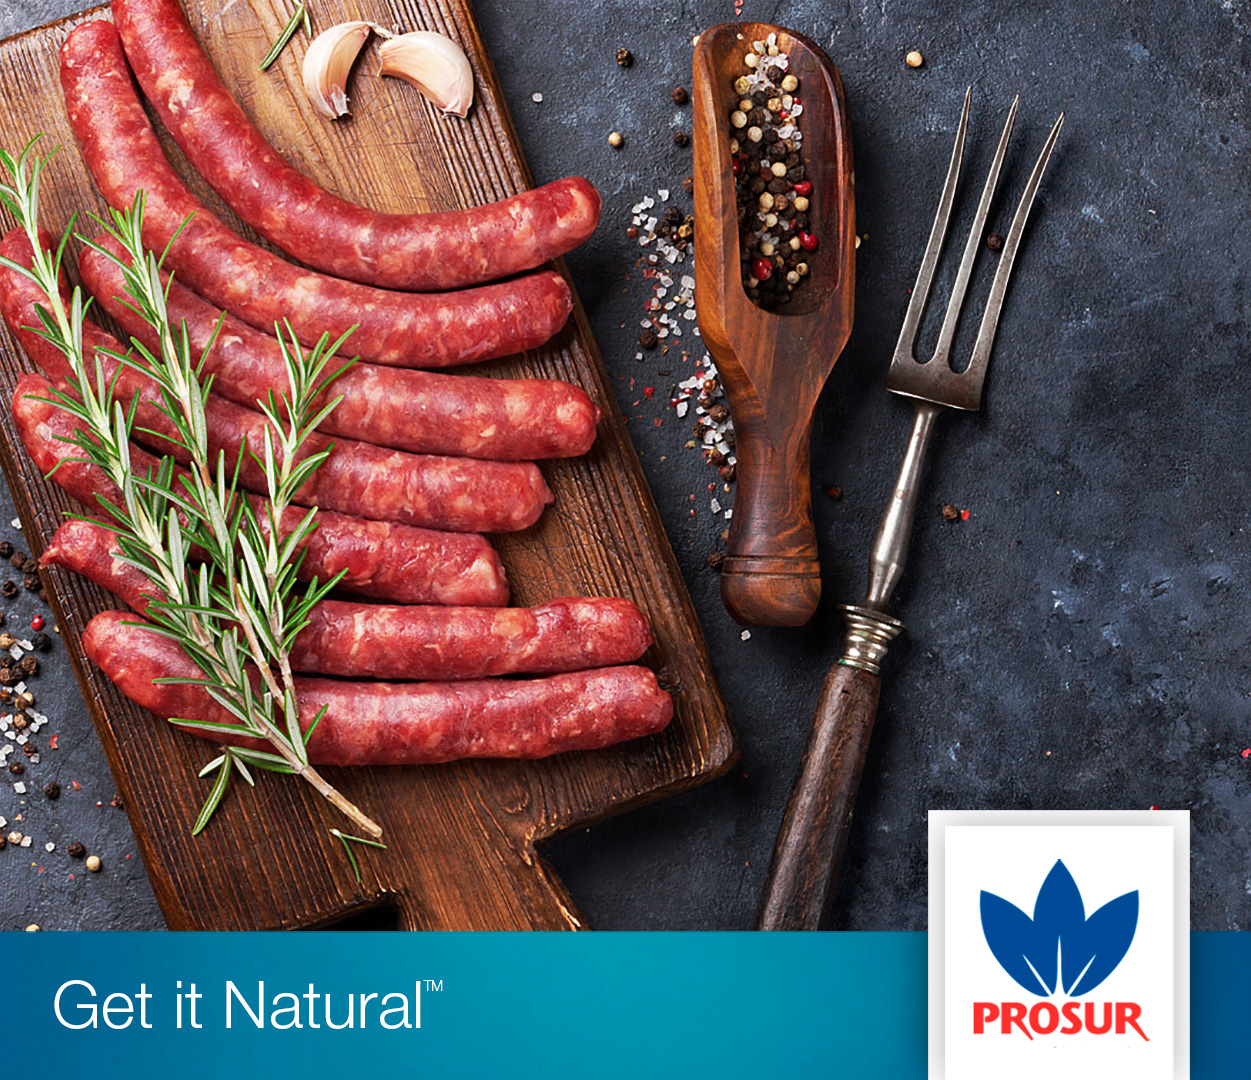 T-2: Natural Protection for Fresh Meat, Poultry and Plant-based Alternatives, Prosur, Inc.